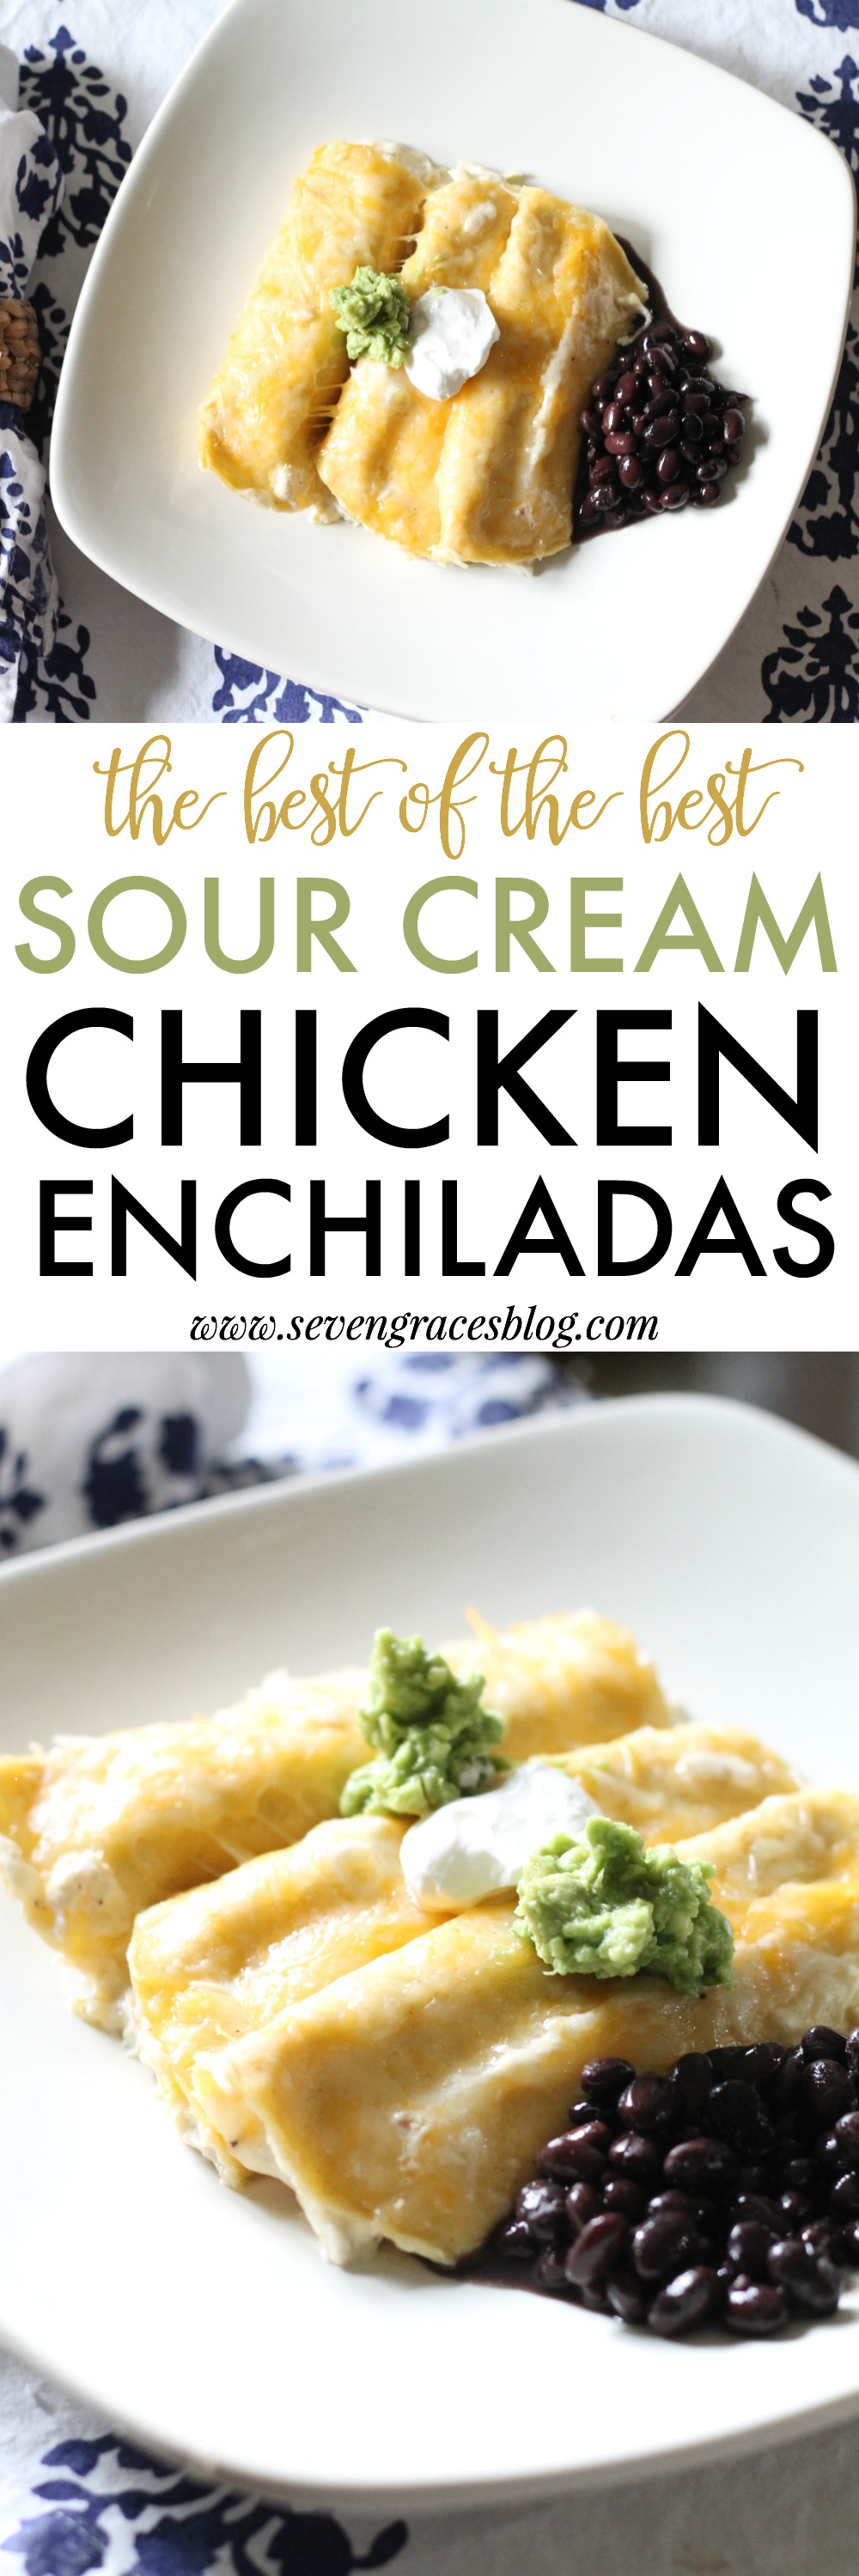 The best of the best sour cream chicken enchiladas. This is the best recipe I've tried! Your kids and family will gobble these right up. Makes a ton too! Perfect for a freezer meal, too.